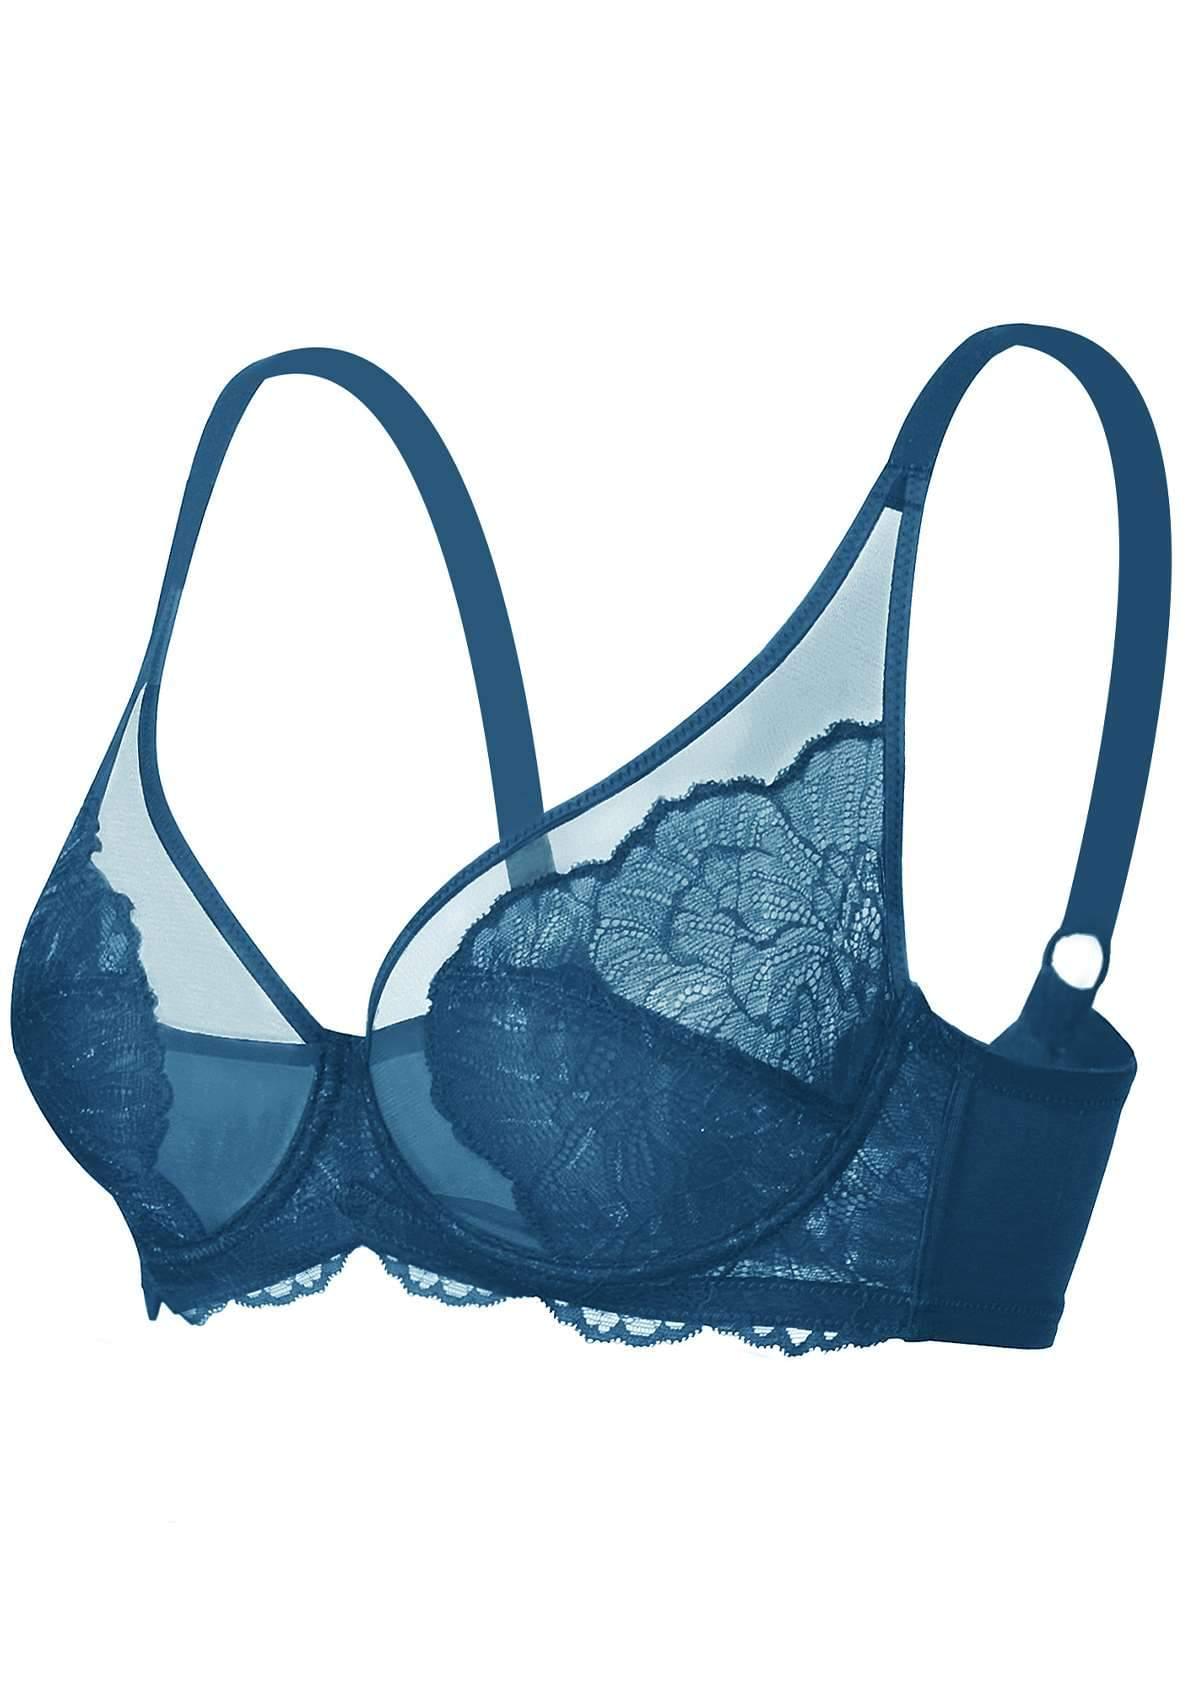 HSIA Blossom Lace Bra And Underwear Sets: Comfortable Plus Size Bra - Biscay Blue / 34 / D